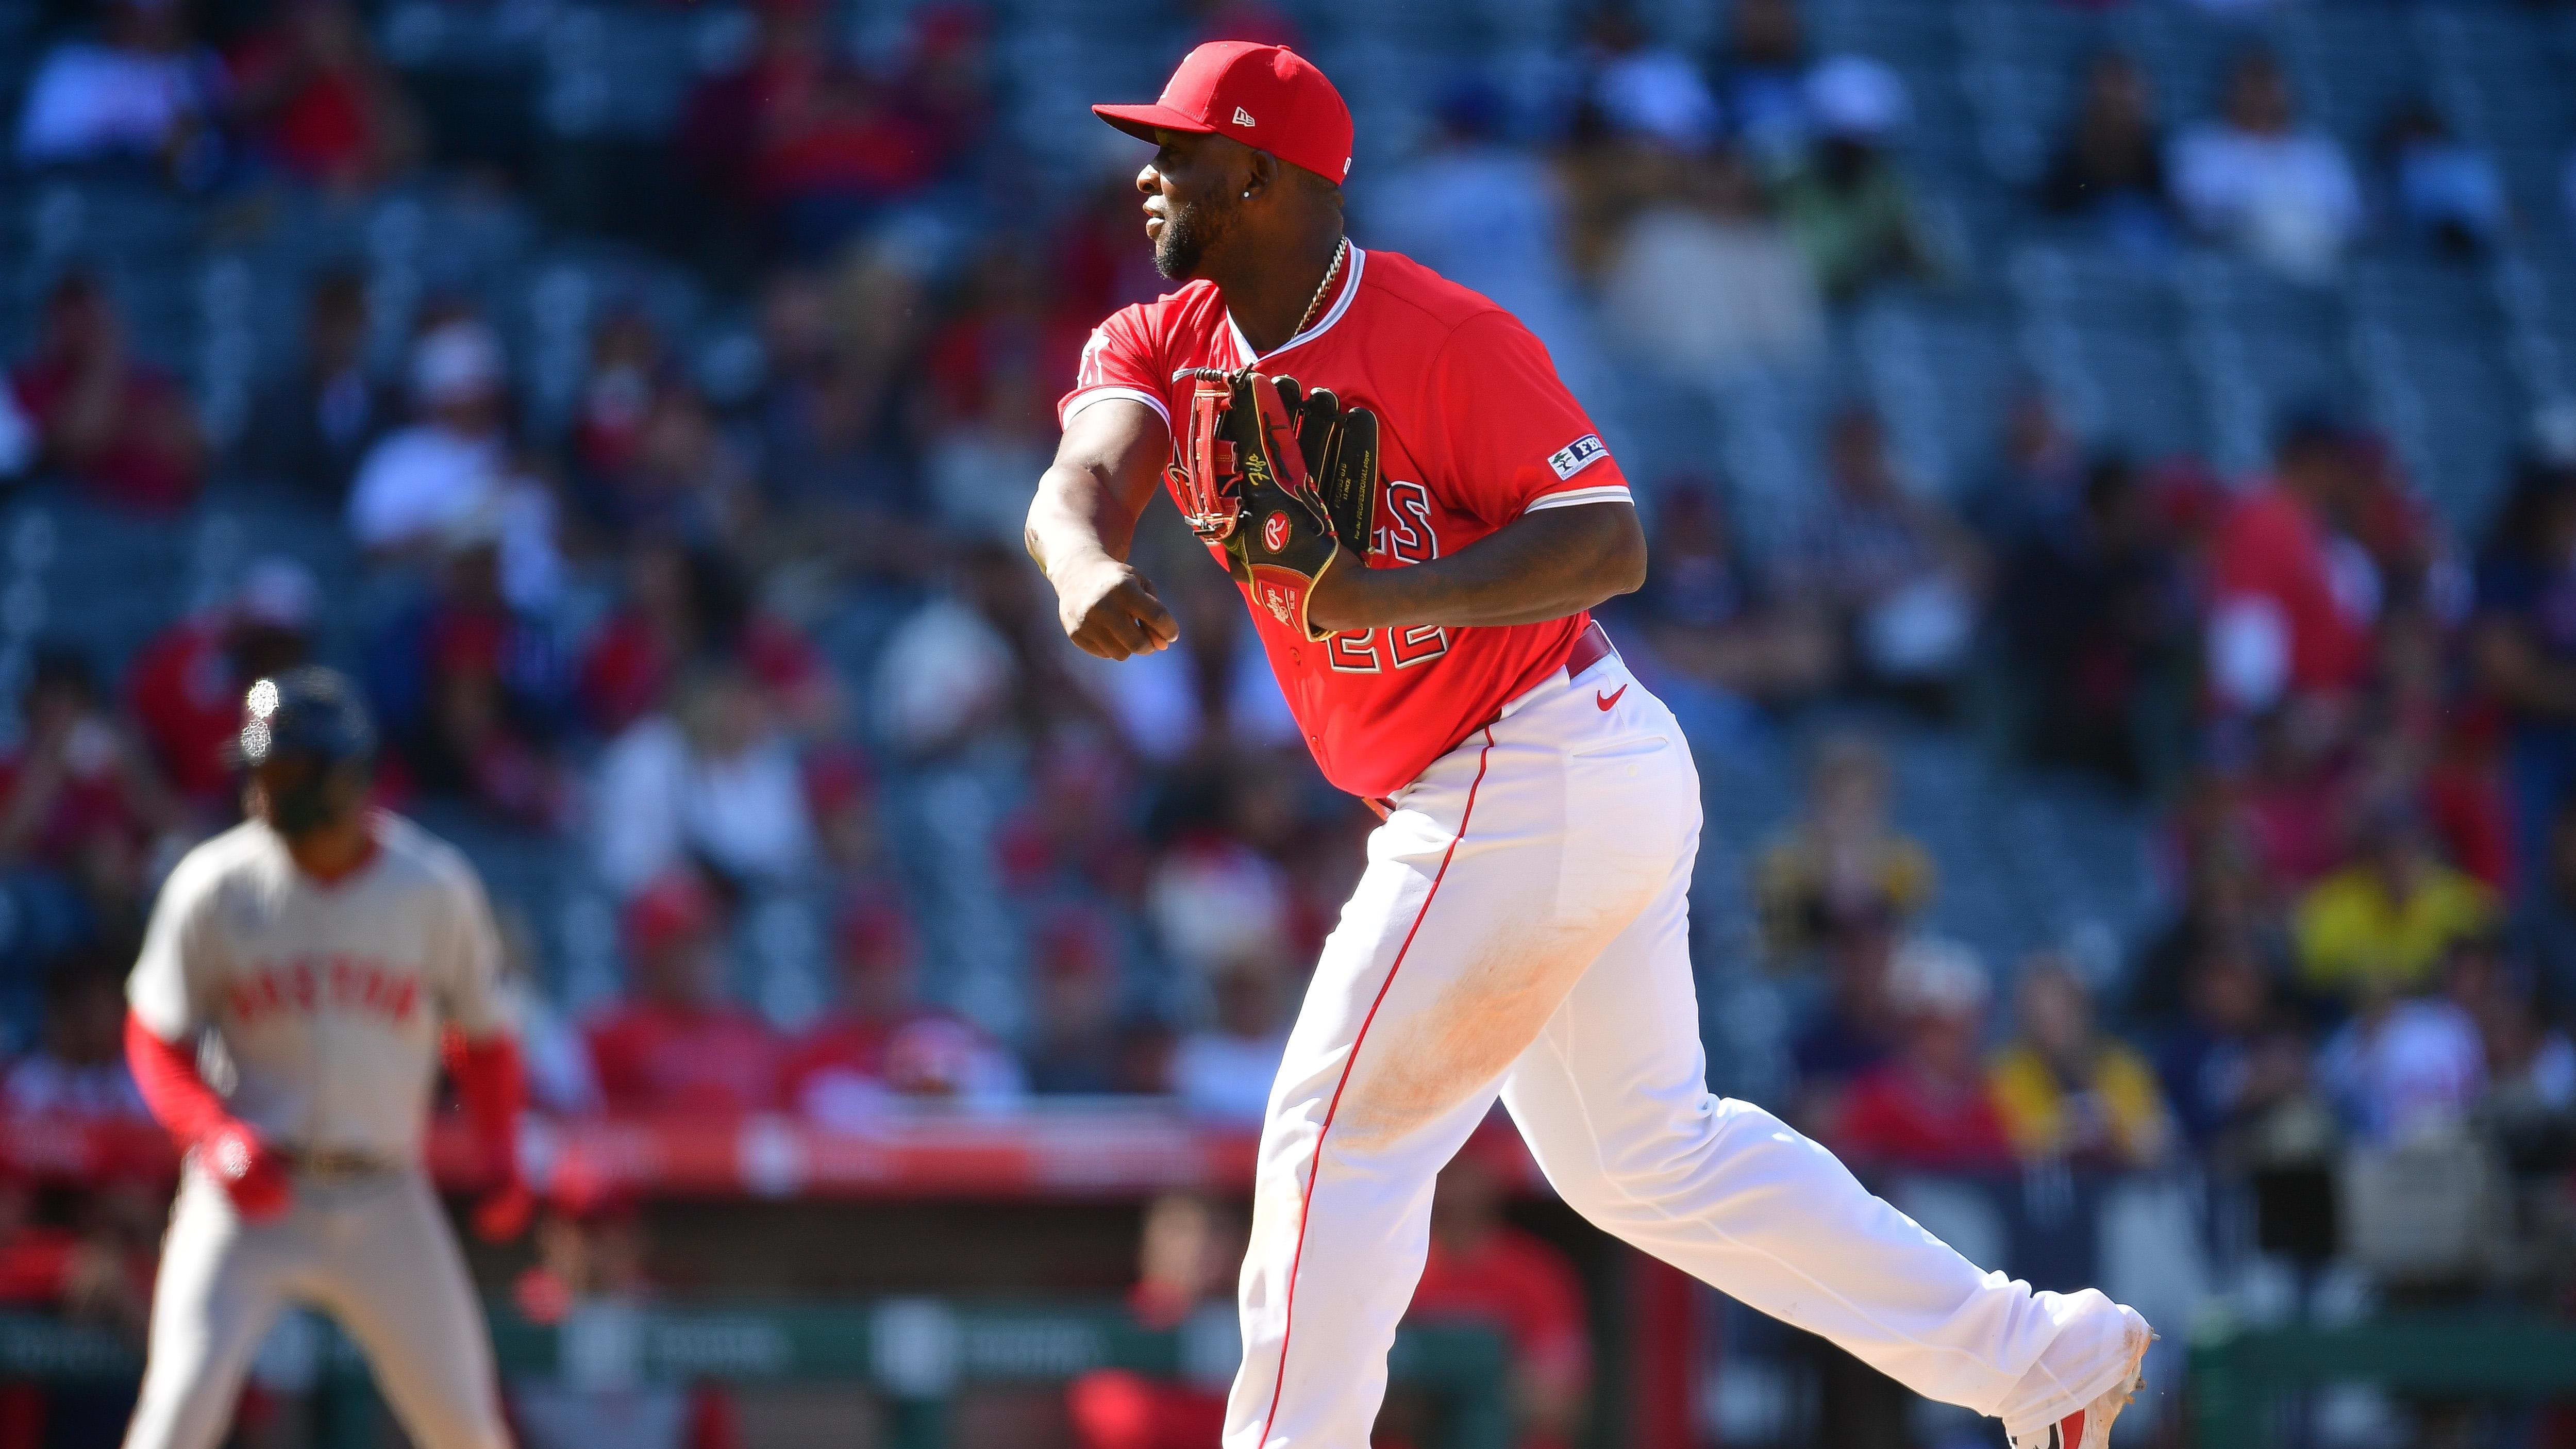 Angels’ Miguel Sanó Makes Diving Stop, Leaves Game With Knee Soreness